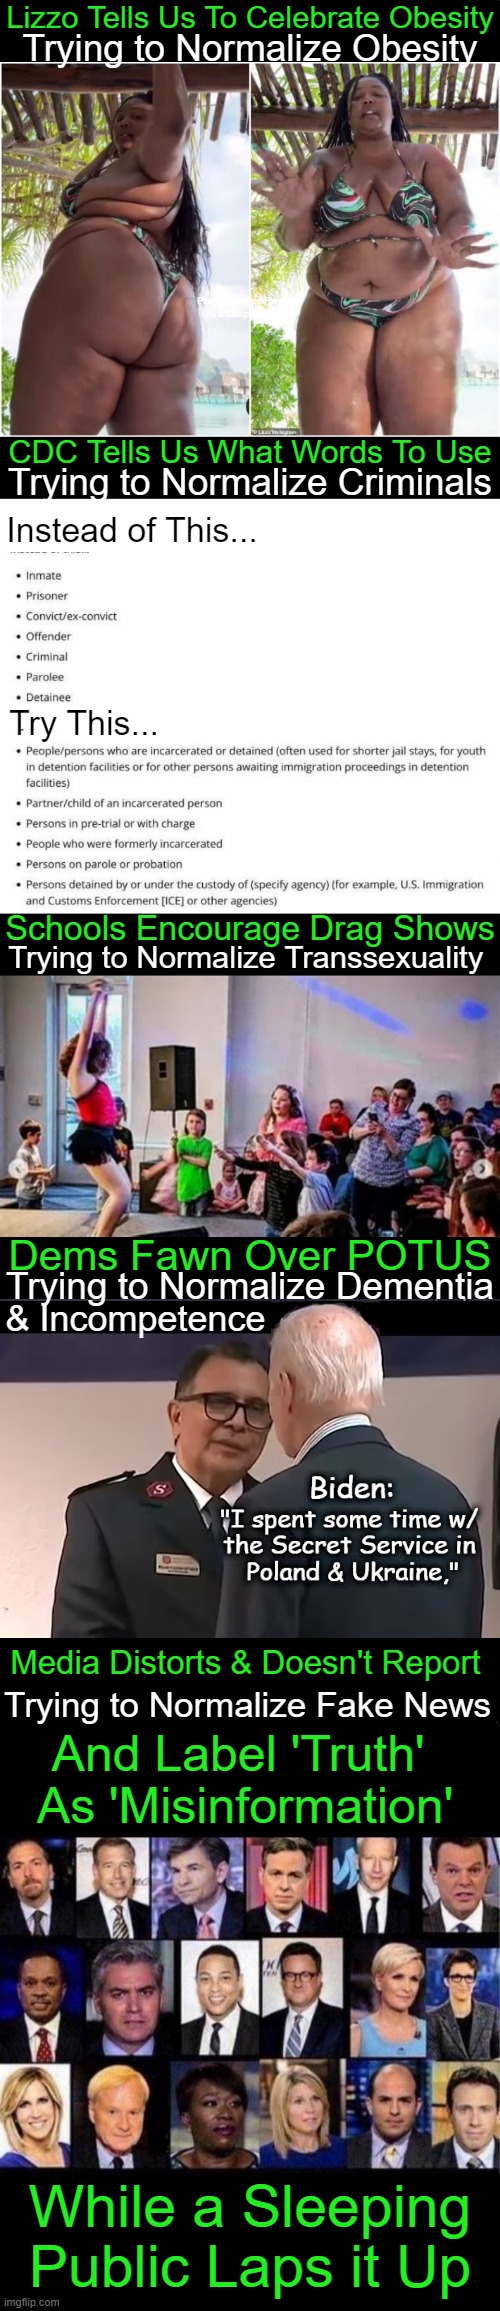 Normalizing The Abnormal | Lizzo Tells Us To Celebrate Obesity; Trying to Normalize Obesity; Partisan Politics Prevails
As a Sleeping Public; CDC Tells Us What Words To Use; Trying to Normalize Criminals; Instead of This... Try This... Schools Encourage Drag Shows; Trying to Normalize Transsexuality; Dems Fawn Over POTUS; Trying to Normalize Dementia; & Incompetence; Media Distorts & Doesn't Report; Trying to Normalize Fake News; And Label 'Truth' 
As 'Misinformation'; While a Sleeping Public Laps it Up | image tagged in politics,obesity,criminals,media,new normal,political humor | made w/ Imgflip meme maker